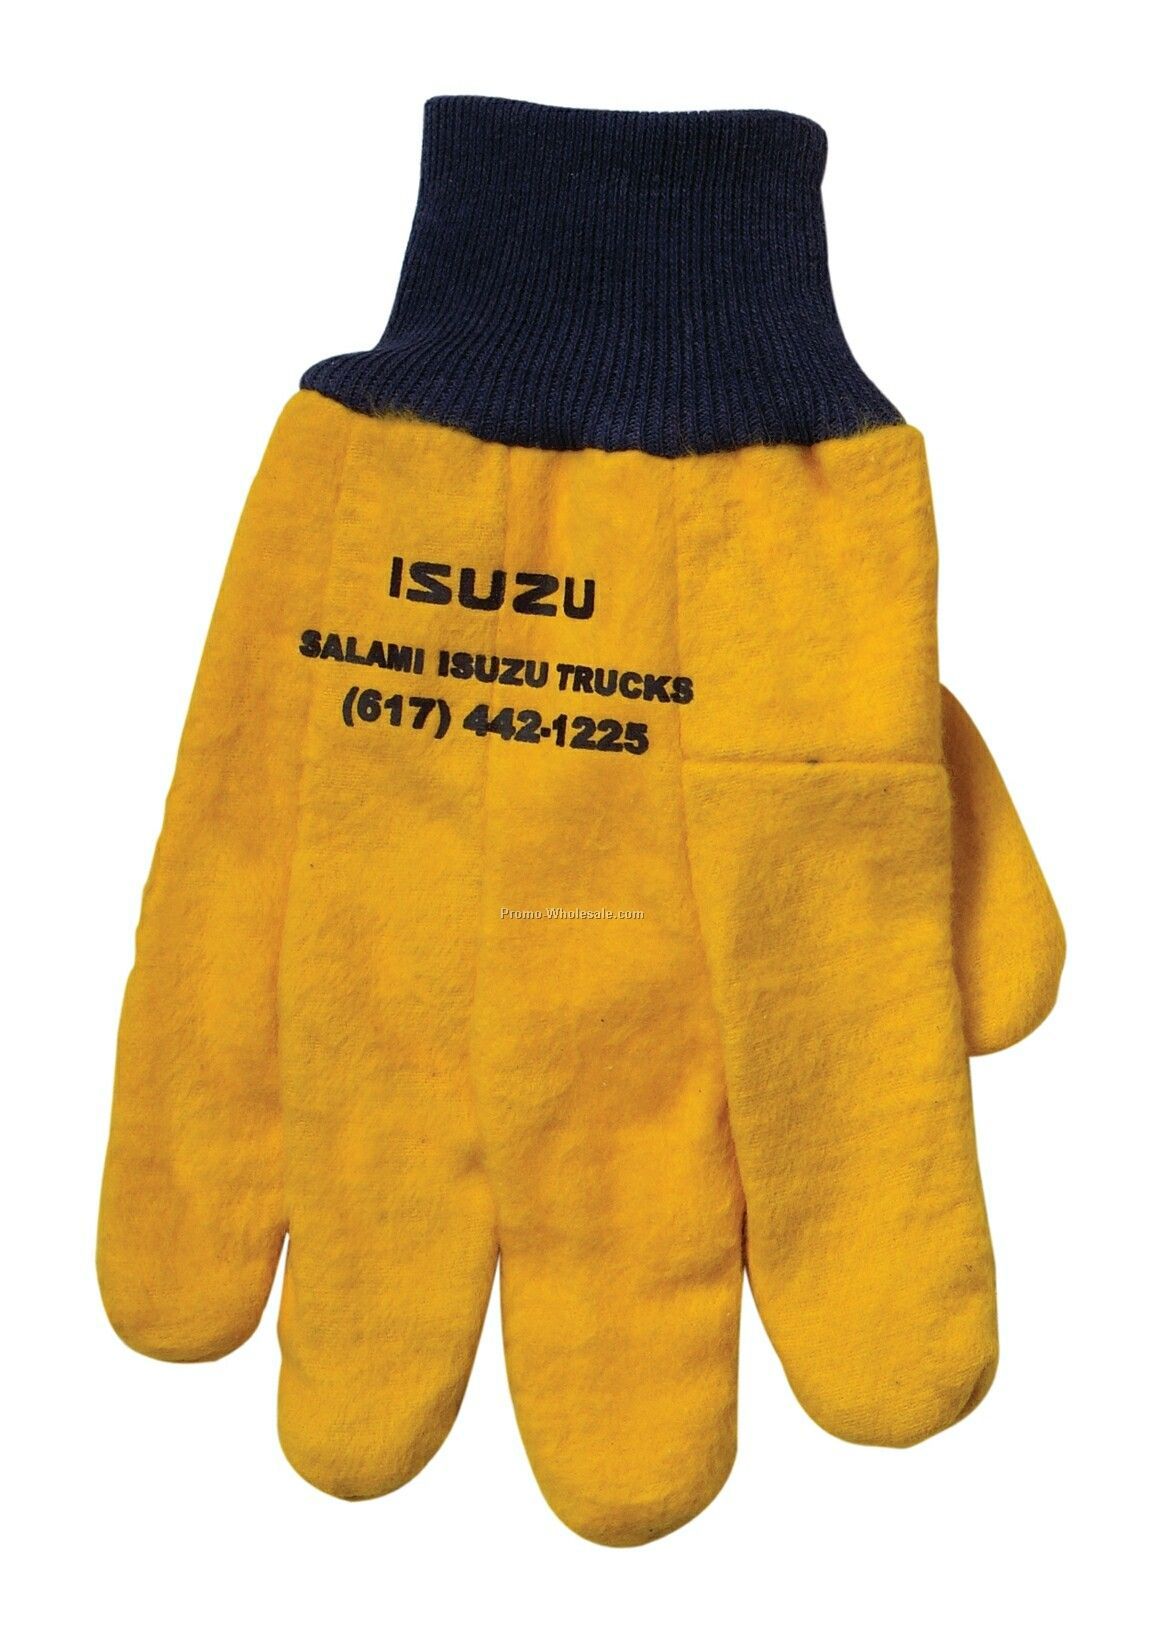 Large Economy Cotton Chore Glove With Red Knit Wrist (Xl)